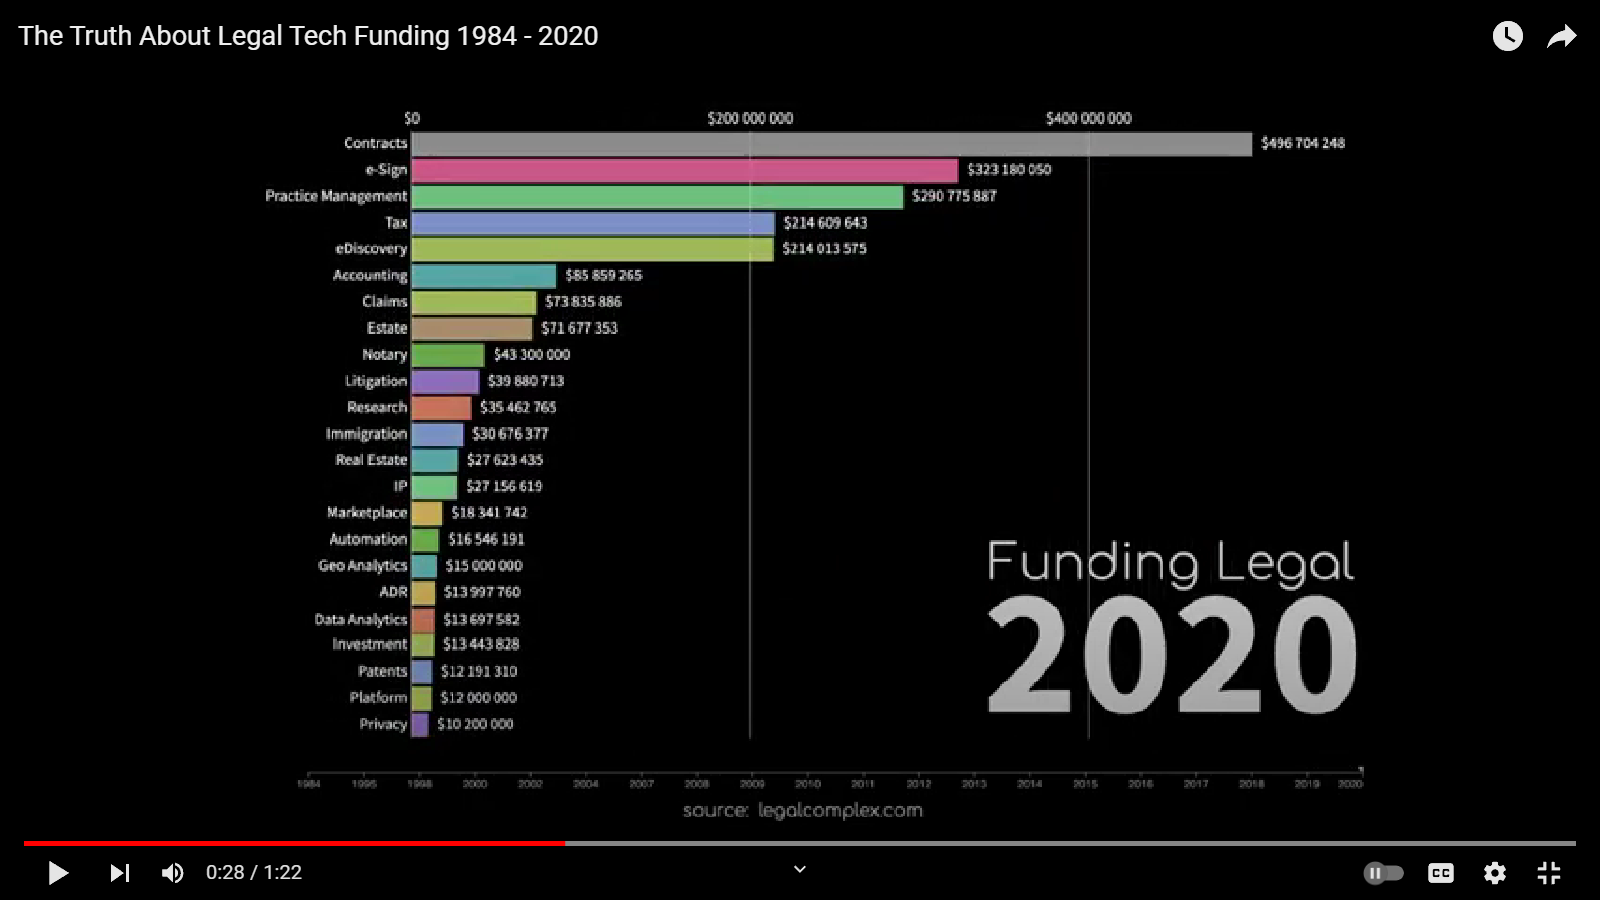 Exclusive Analysis: The True Story of Legal Tech Funding, 1984-2020